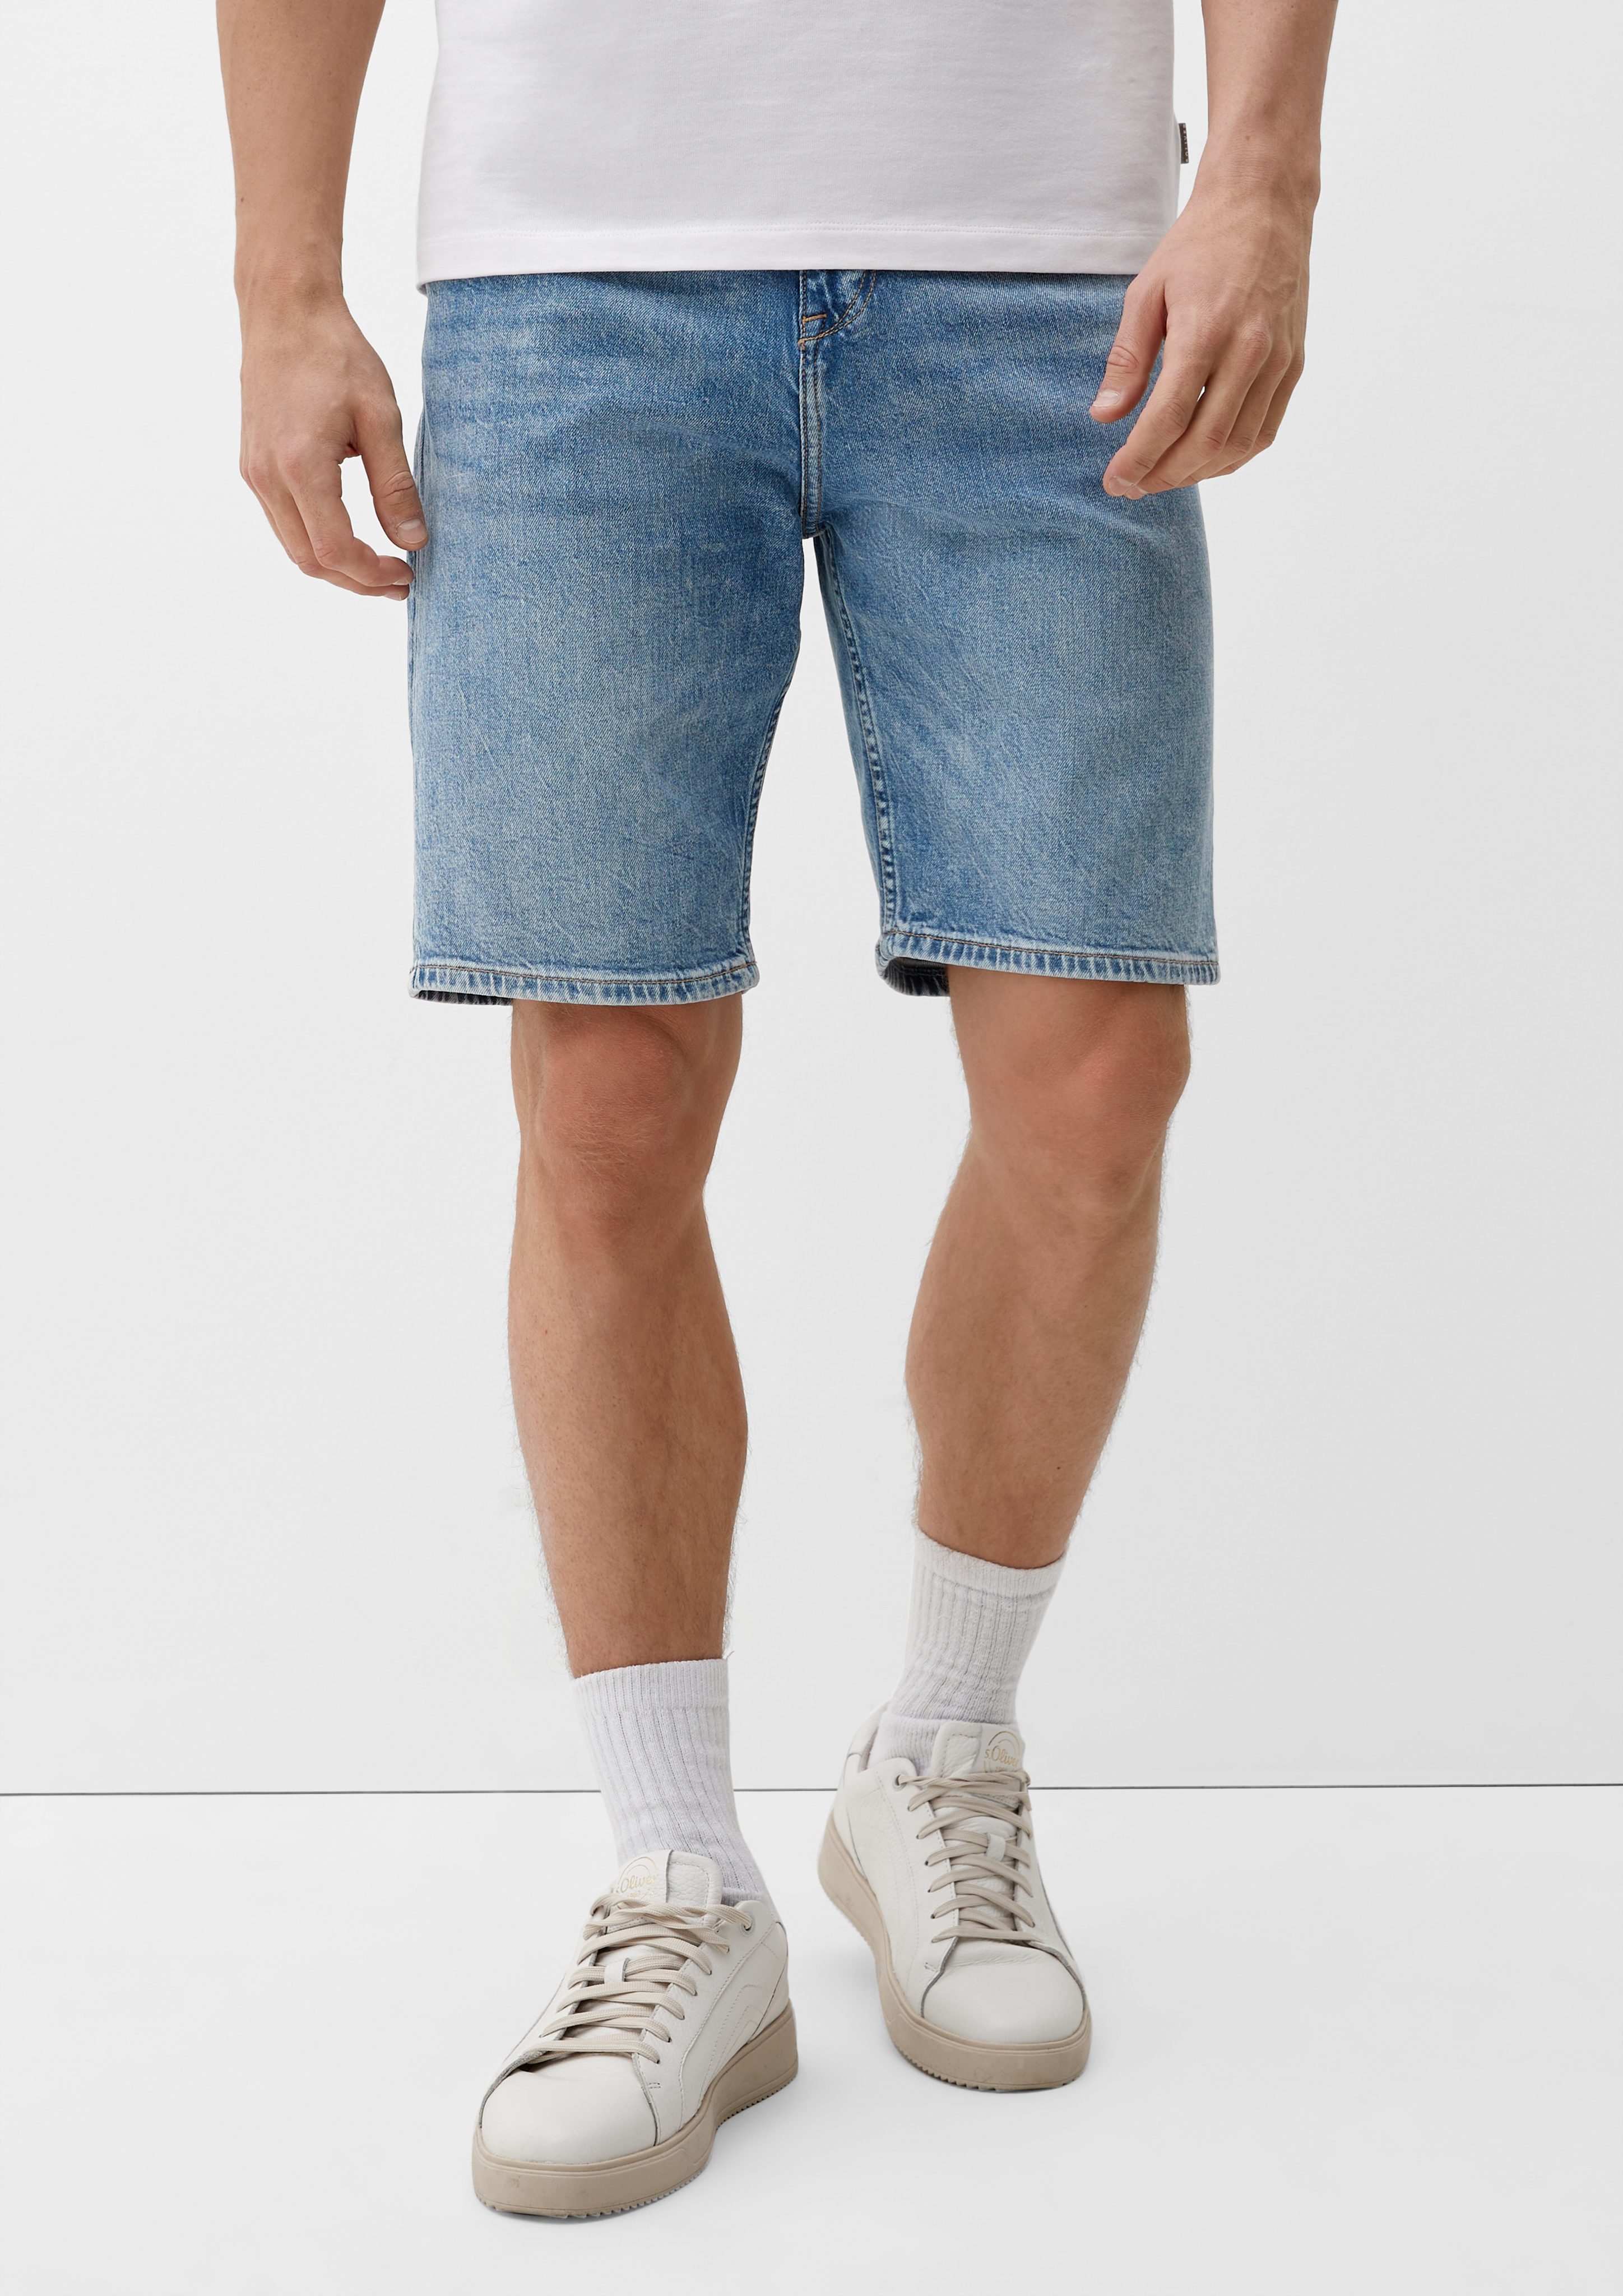 Jeansshorts Fit Leder-Patch Relaxed Waschung, / Mid Jeans-Shorts Rise s.Oliver /